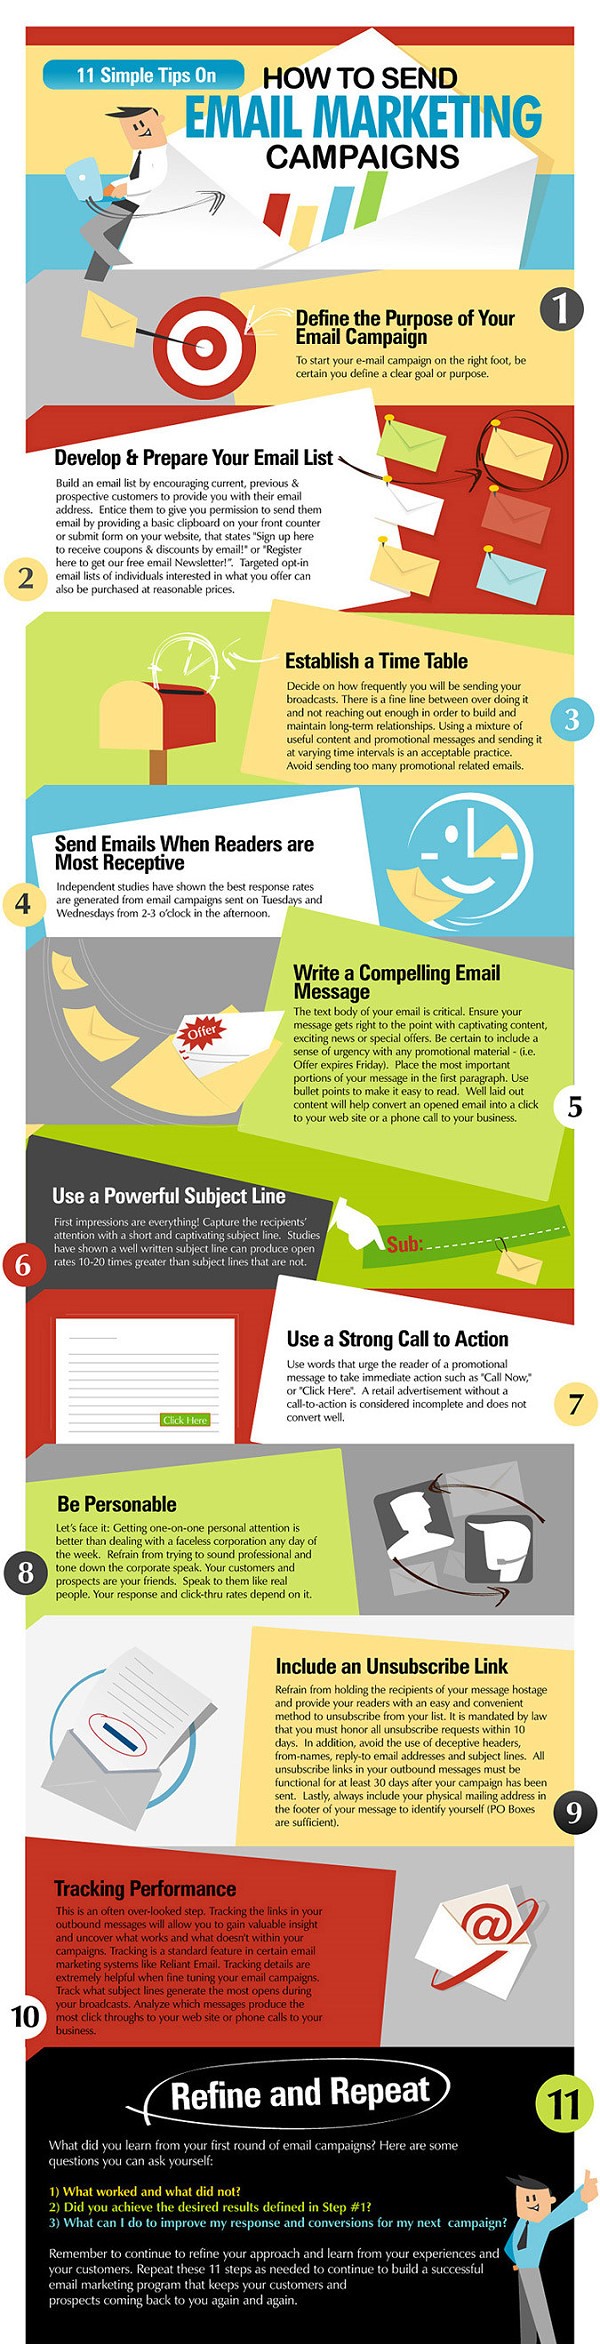 EMail Marketing Guide